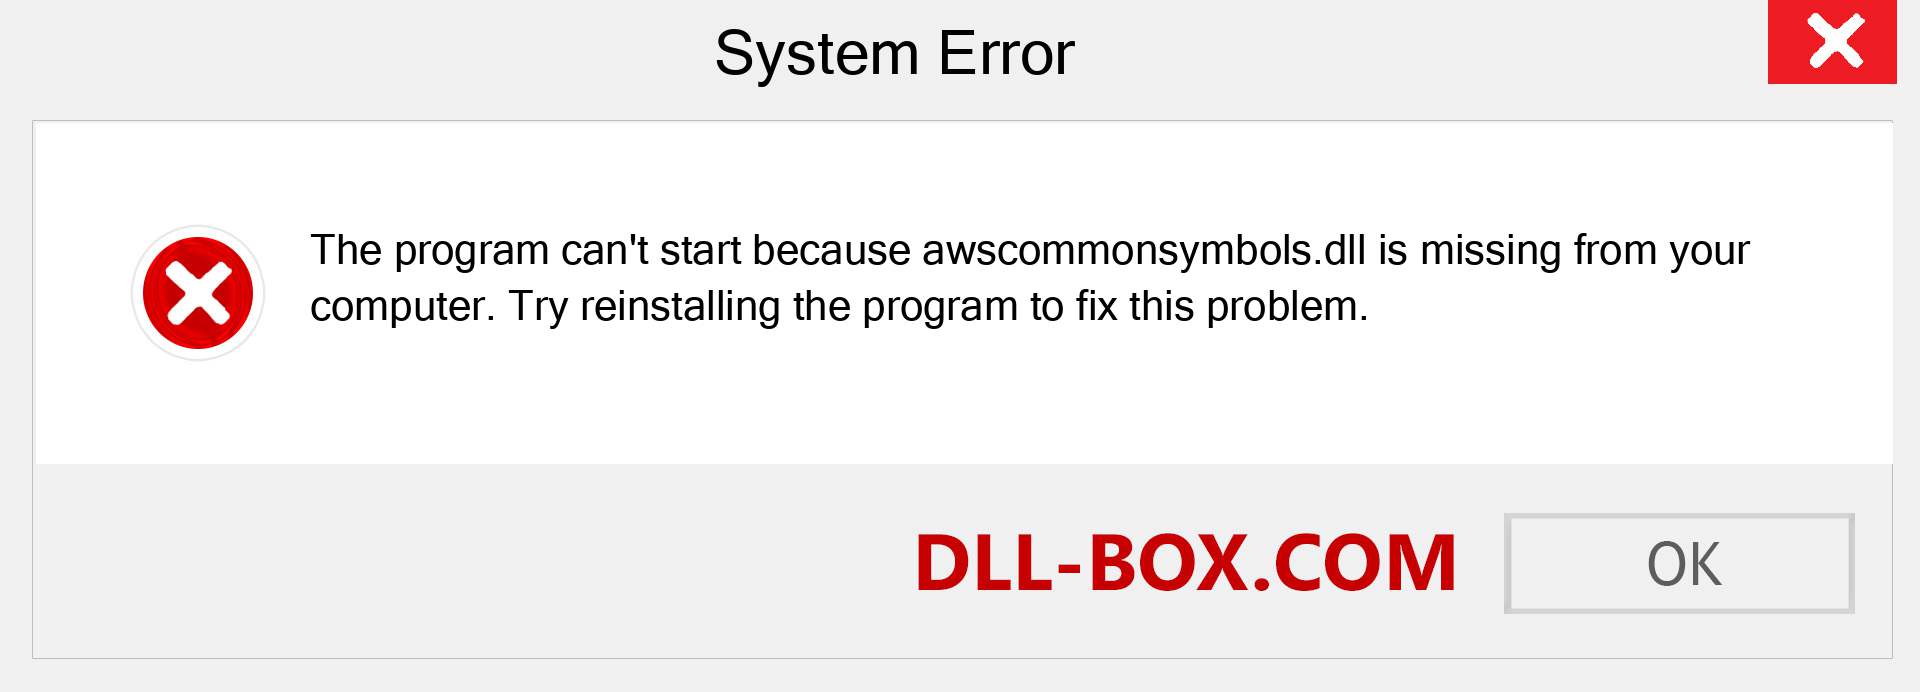  awscommonsymbols.dll file is missing?. Download for Windows 7, 8, 10 - Fix  awscommonsymbols dll Missing Error on Windows, photos, images